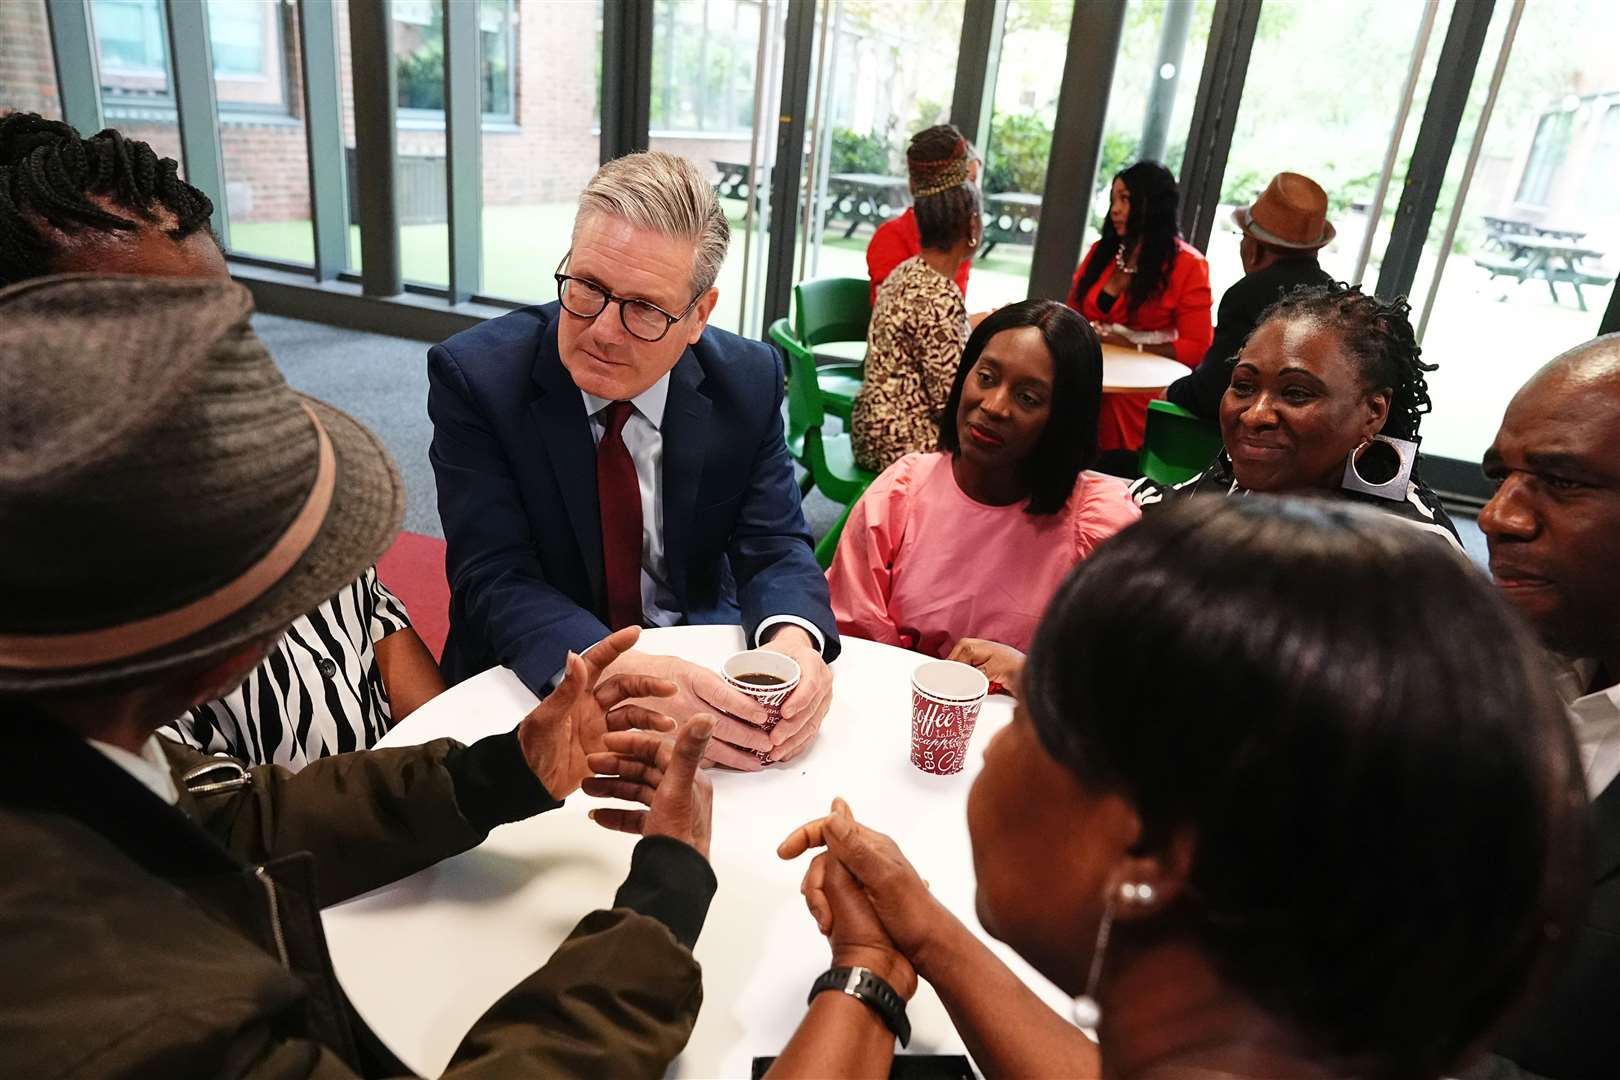 Labour Party leader Sir Keir Starmer attends a coffee morning with members of the Windrush generation at a school in Vauxhall, London (Aaron Chown/PA)